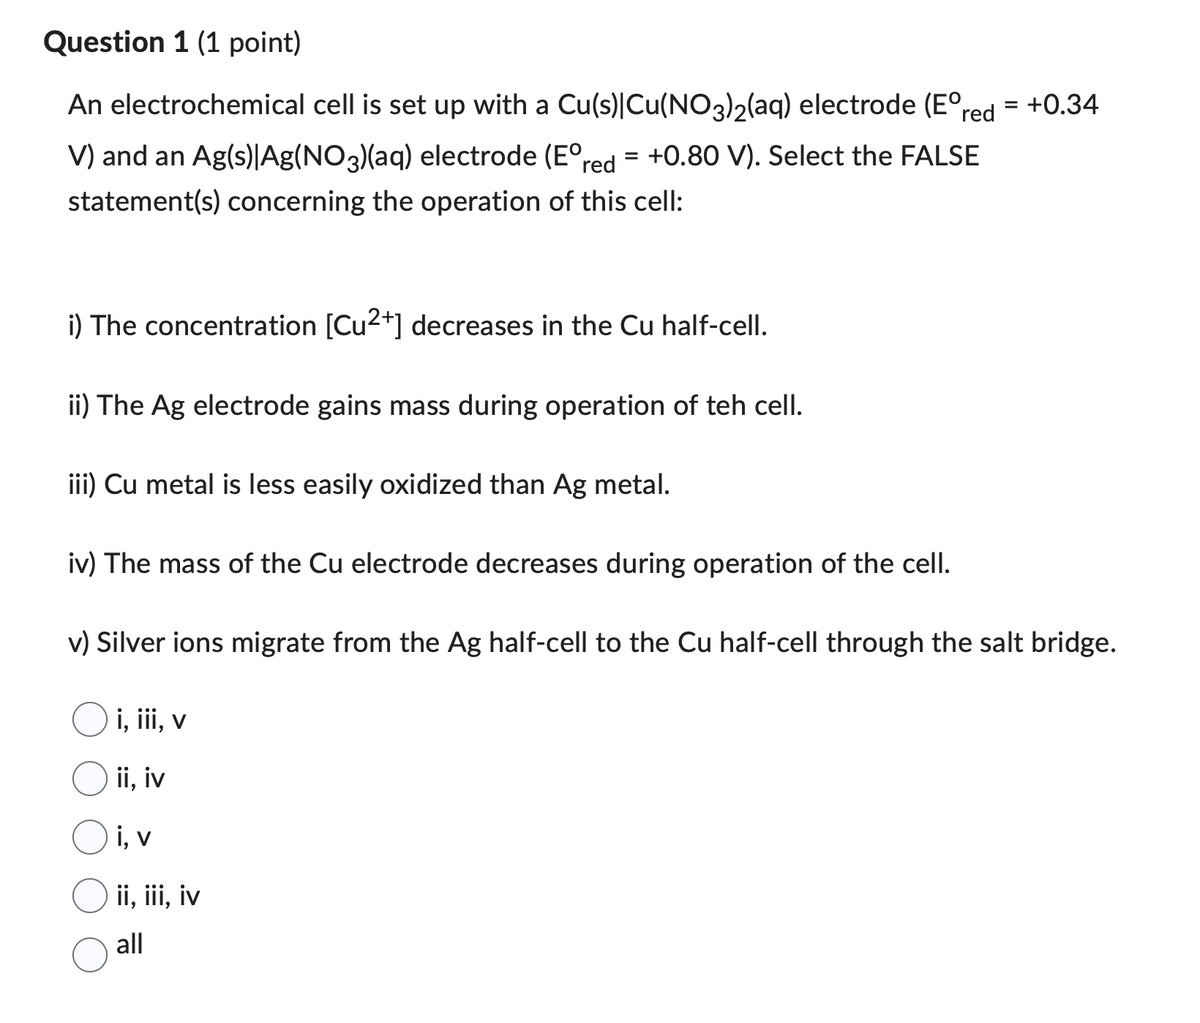 Question 1 (1 point)
An electrochemical cell is set up with a Cu(s)|Cu(NO3)2(aq) electrode (E° red = +0.34
V) and an Ag(s)|Ag(NO3)(aq) electrode (E° red = +0.80 V). Select the FALSE
statement(s) concerning the operation of this cell:
i) The concentration [Cu2+] decreases in the Cu half-cell.
ii) The Ag electrode gains mass during operation of teh cell.
iii) Cu metal is less easily oxidized than Ag metal.
iv) The mass of the Cu electrode decreases during operation of the cell.
v) Silver ions migrate from the Ag half-cell to the Cu half-cell through the salt bridge.
i, iii, v
ii, iv
i, v
ii, iii, iv
all